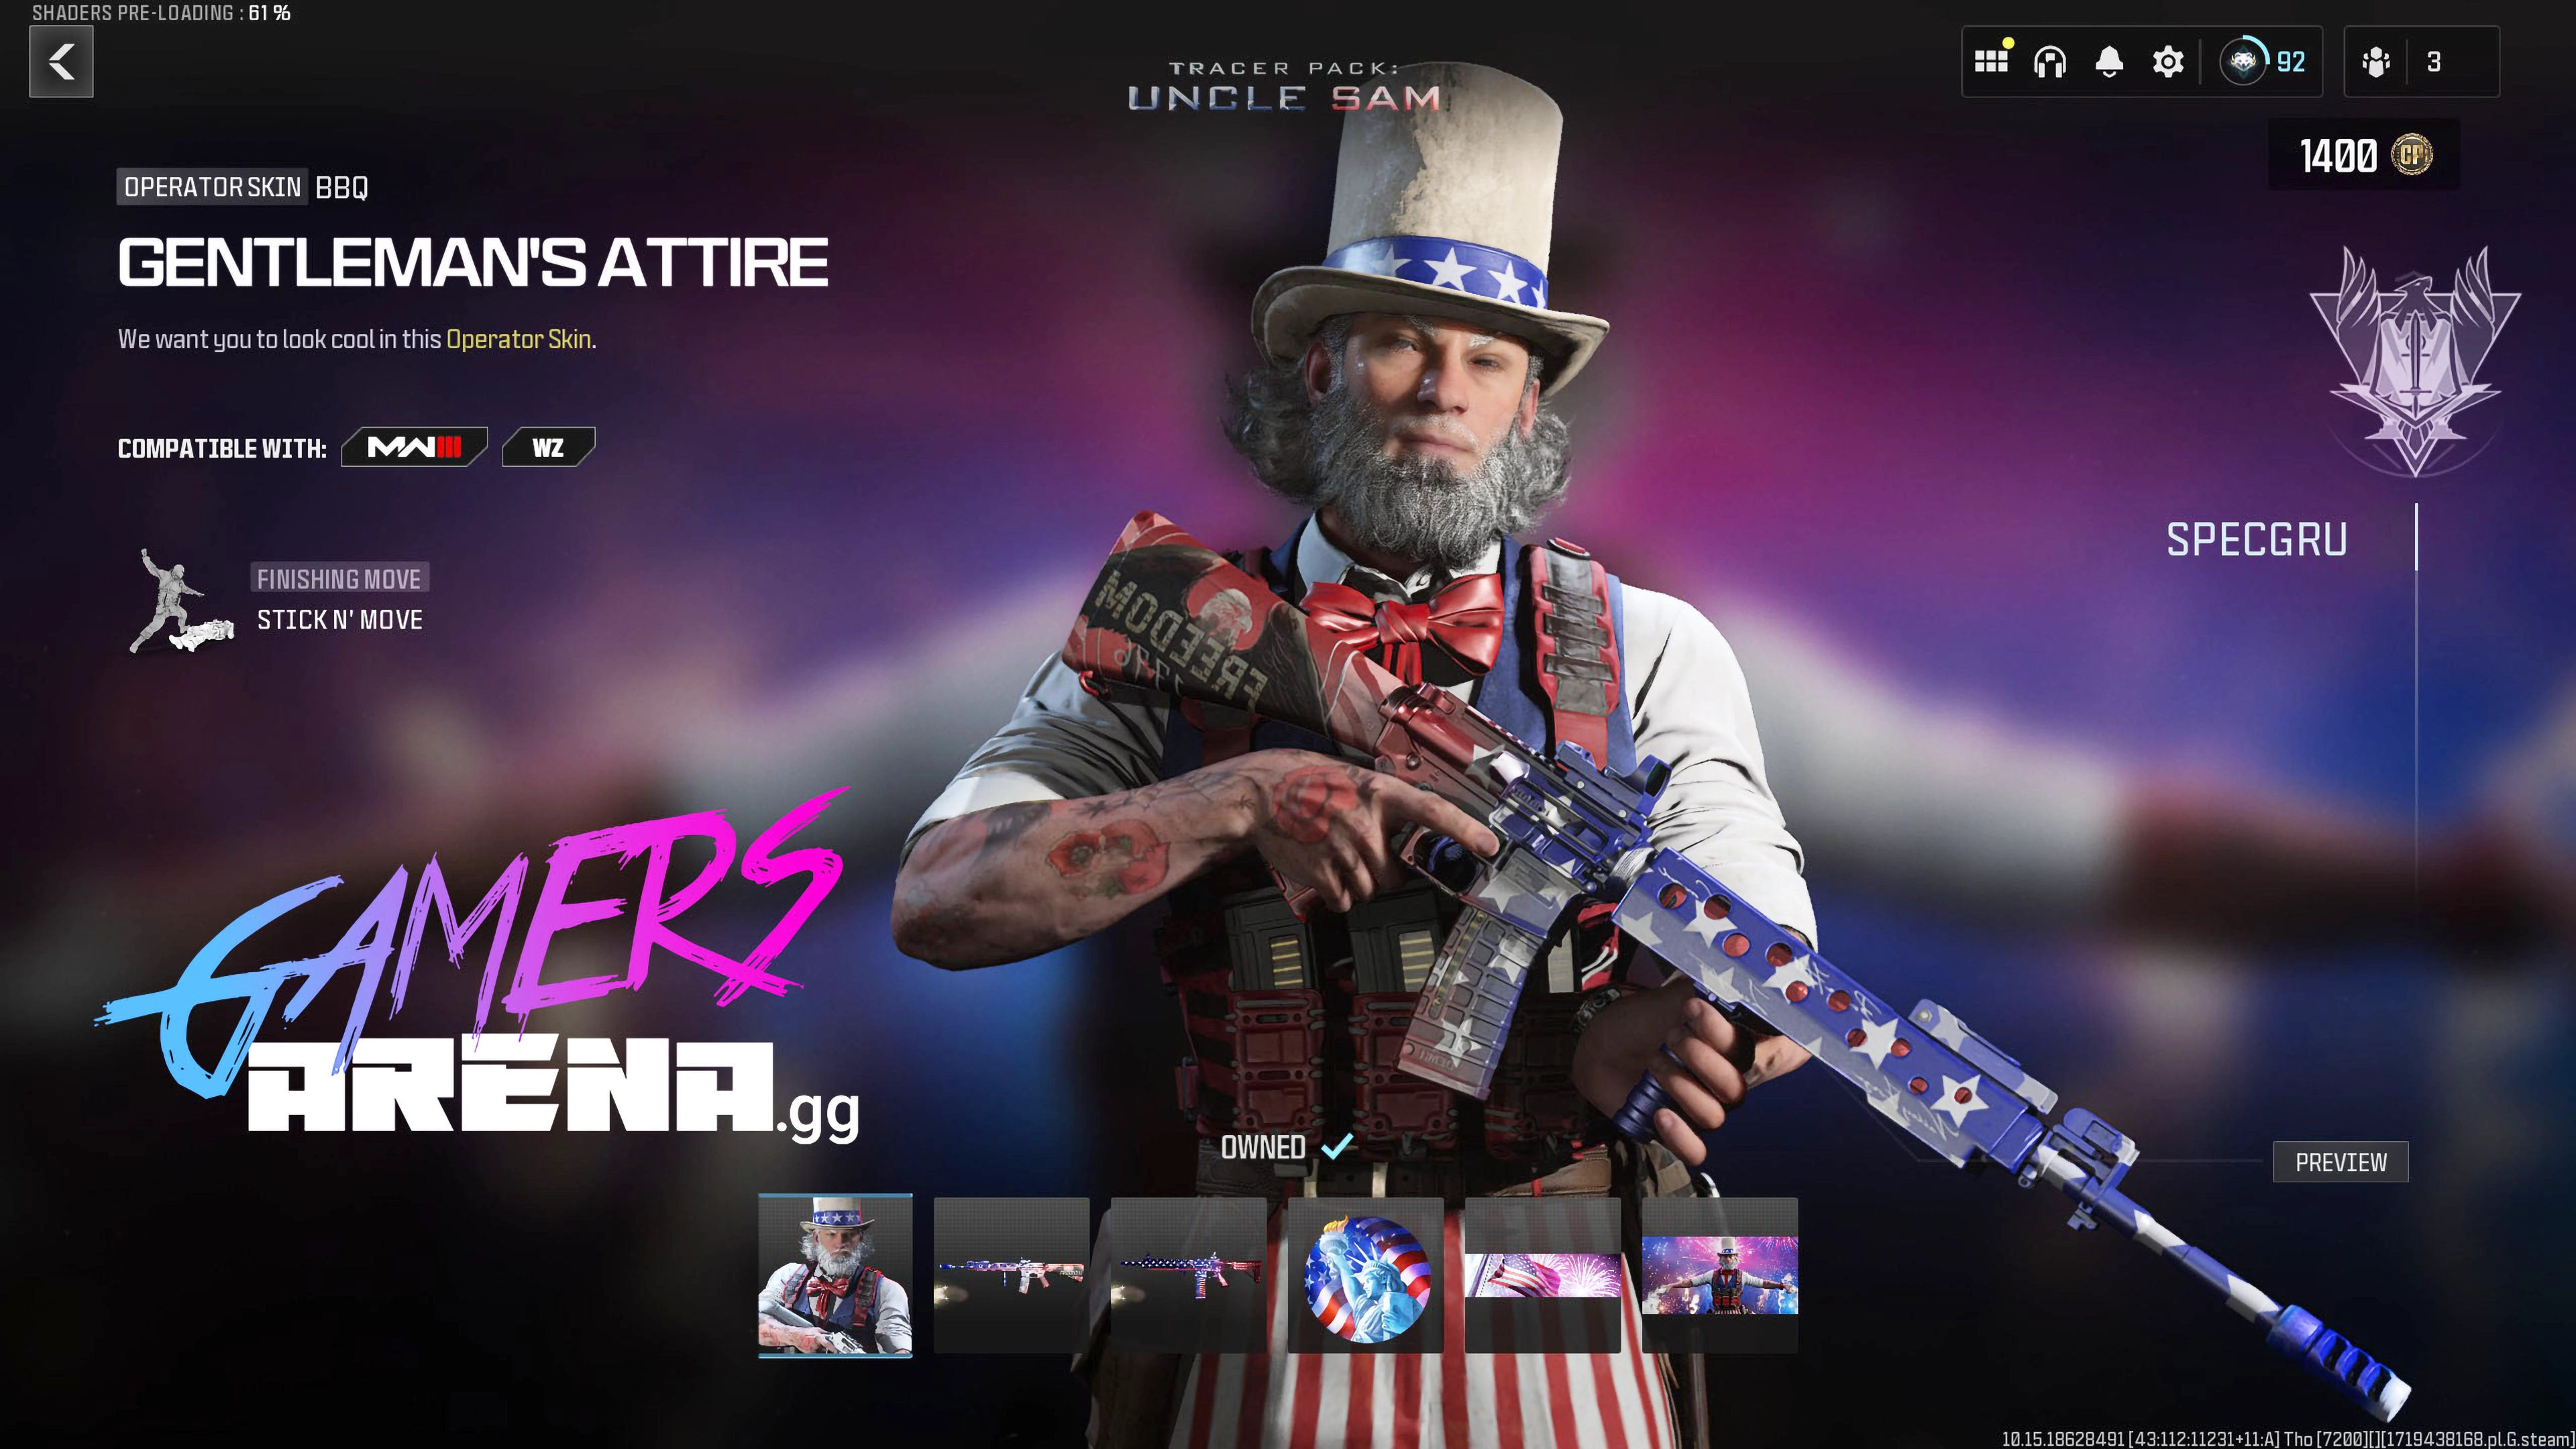 Tracer Pack UNCLE SAM Bbq Operator Skin Bundle HARD UNLOCKED PS XBOX PC - Ultra Rare